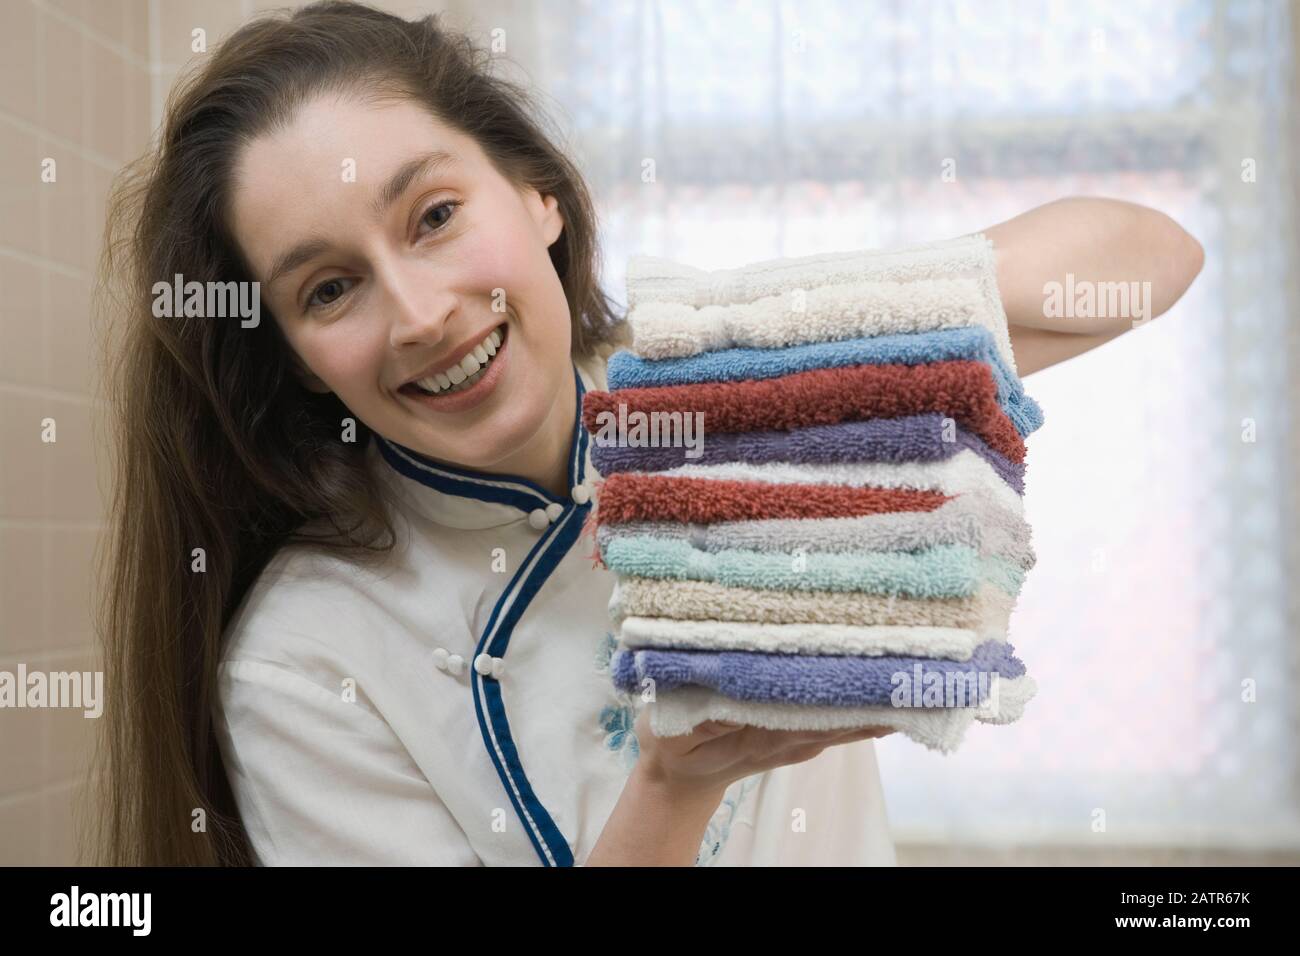 https://c8.alamy.com/comp/2ATR67K/portrait-of-a-mid-adult-woman-holding-a-stack-of-washcloths-and-smiling-2ATR67K.jpg